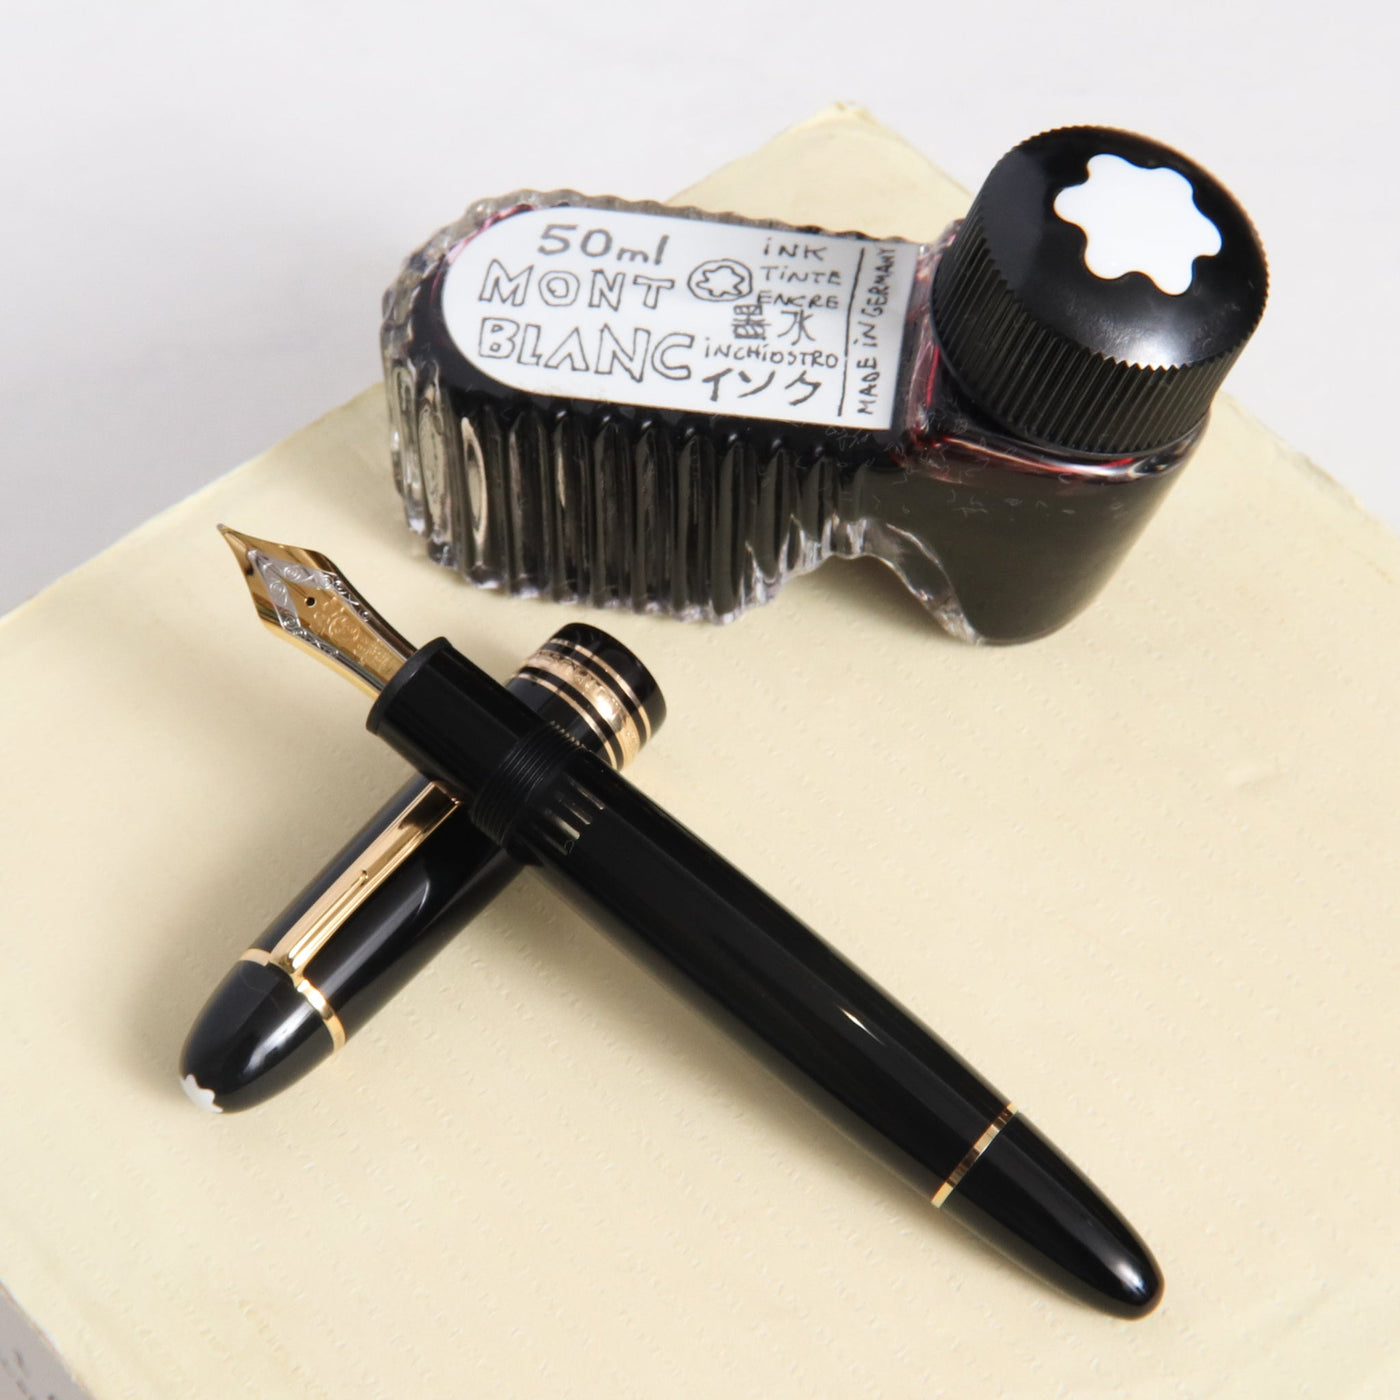 Montblanc Meisterstuck 149 UNICEF Tom Sachs Fountain Pen - Preowned With 50mL Ink Bottle